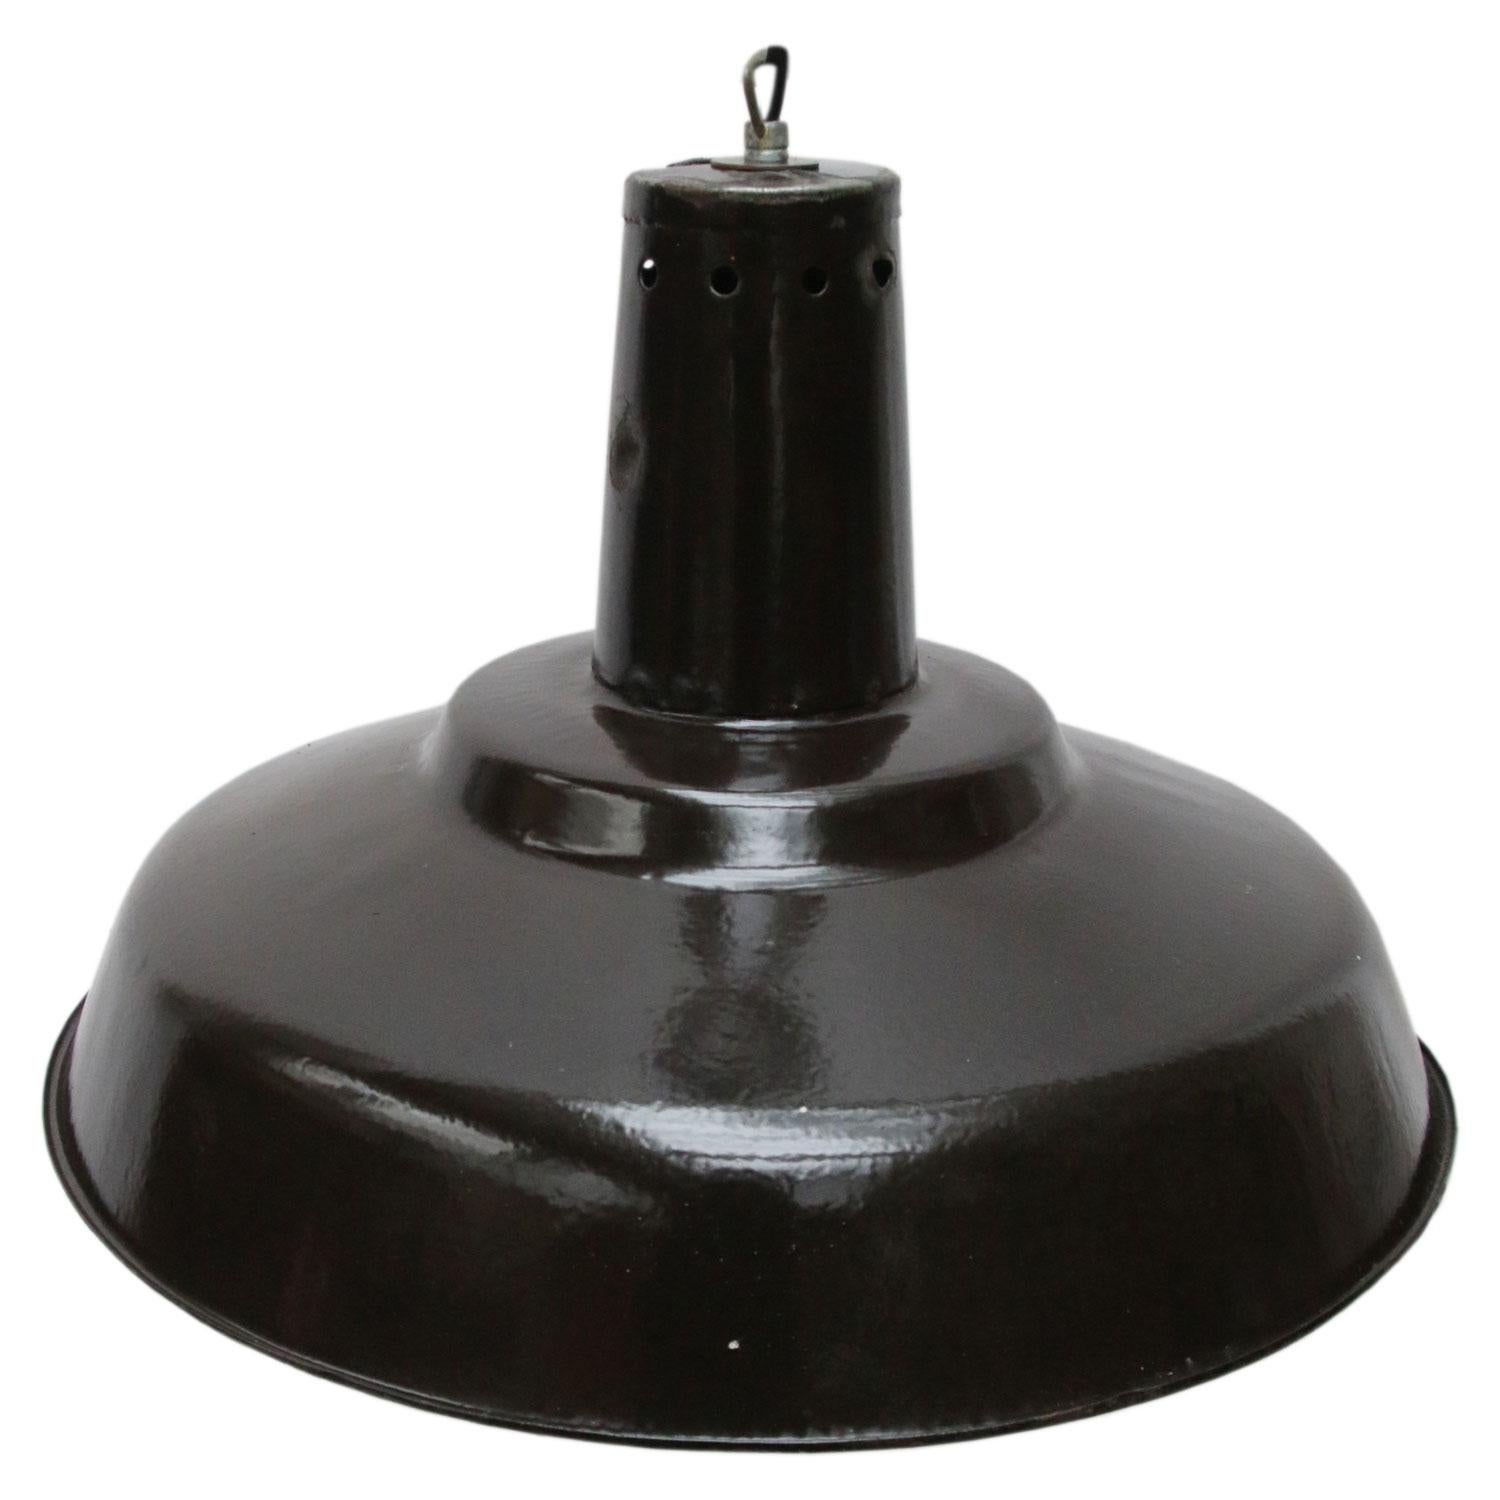 Dark brown enamel factory pendant from the Ukraine.
White interior.

Weight: 2.1 kg / 4.6 lb

All lamps have been made suitable by international standards for incandescent light bulbs, energy-efficient and LED bulbs. E26/E27 bulb holders and